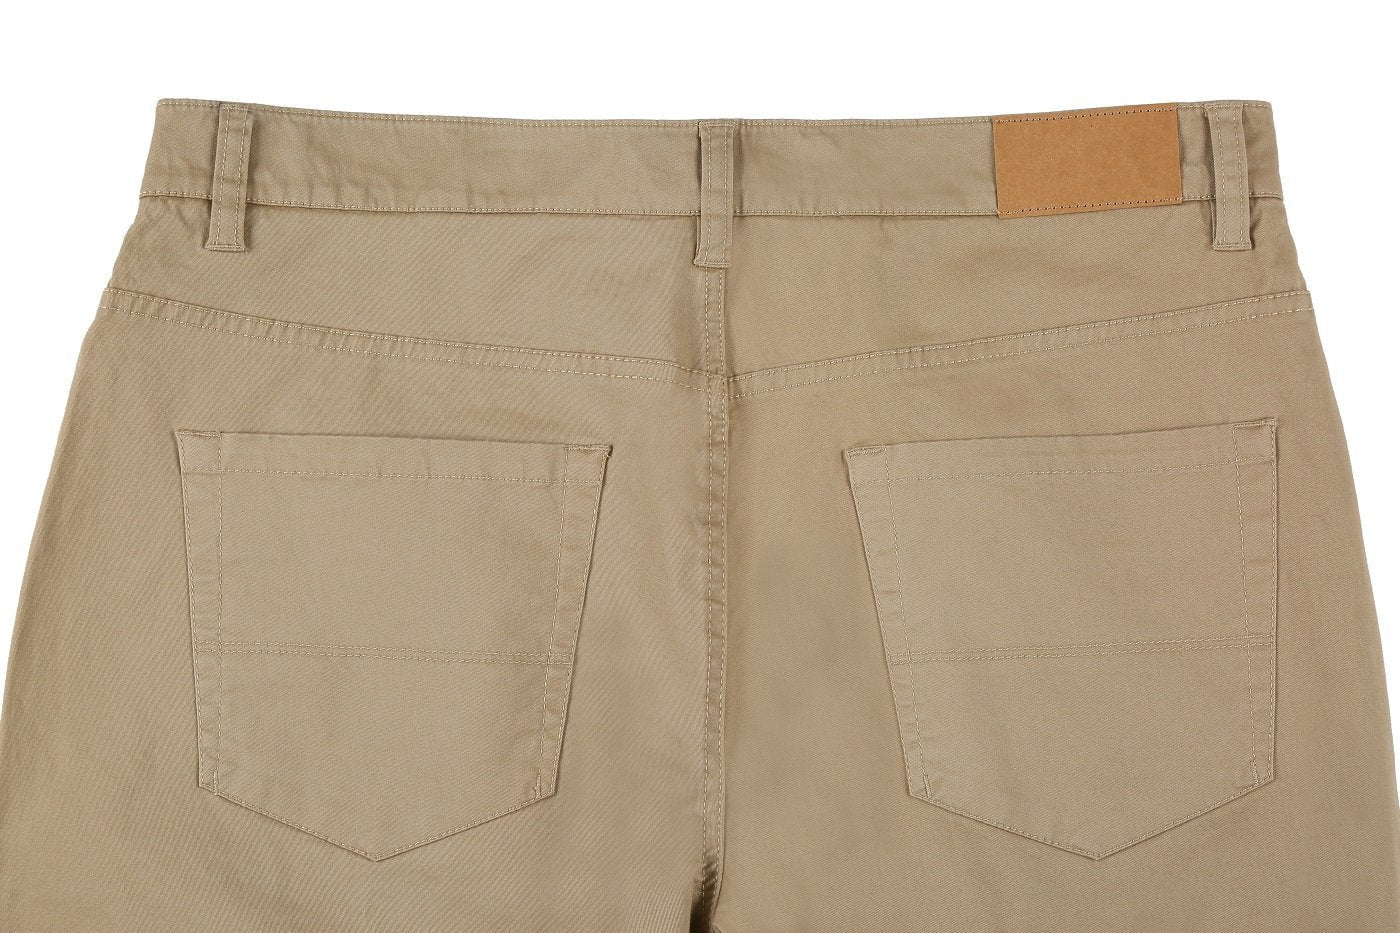 PF20-21 Men's 5-Pocket Tan Cotton Stretch Washed Flat Front Chino Pants